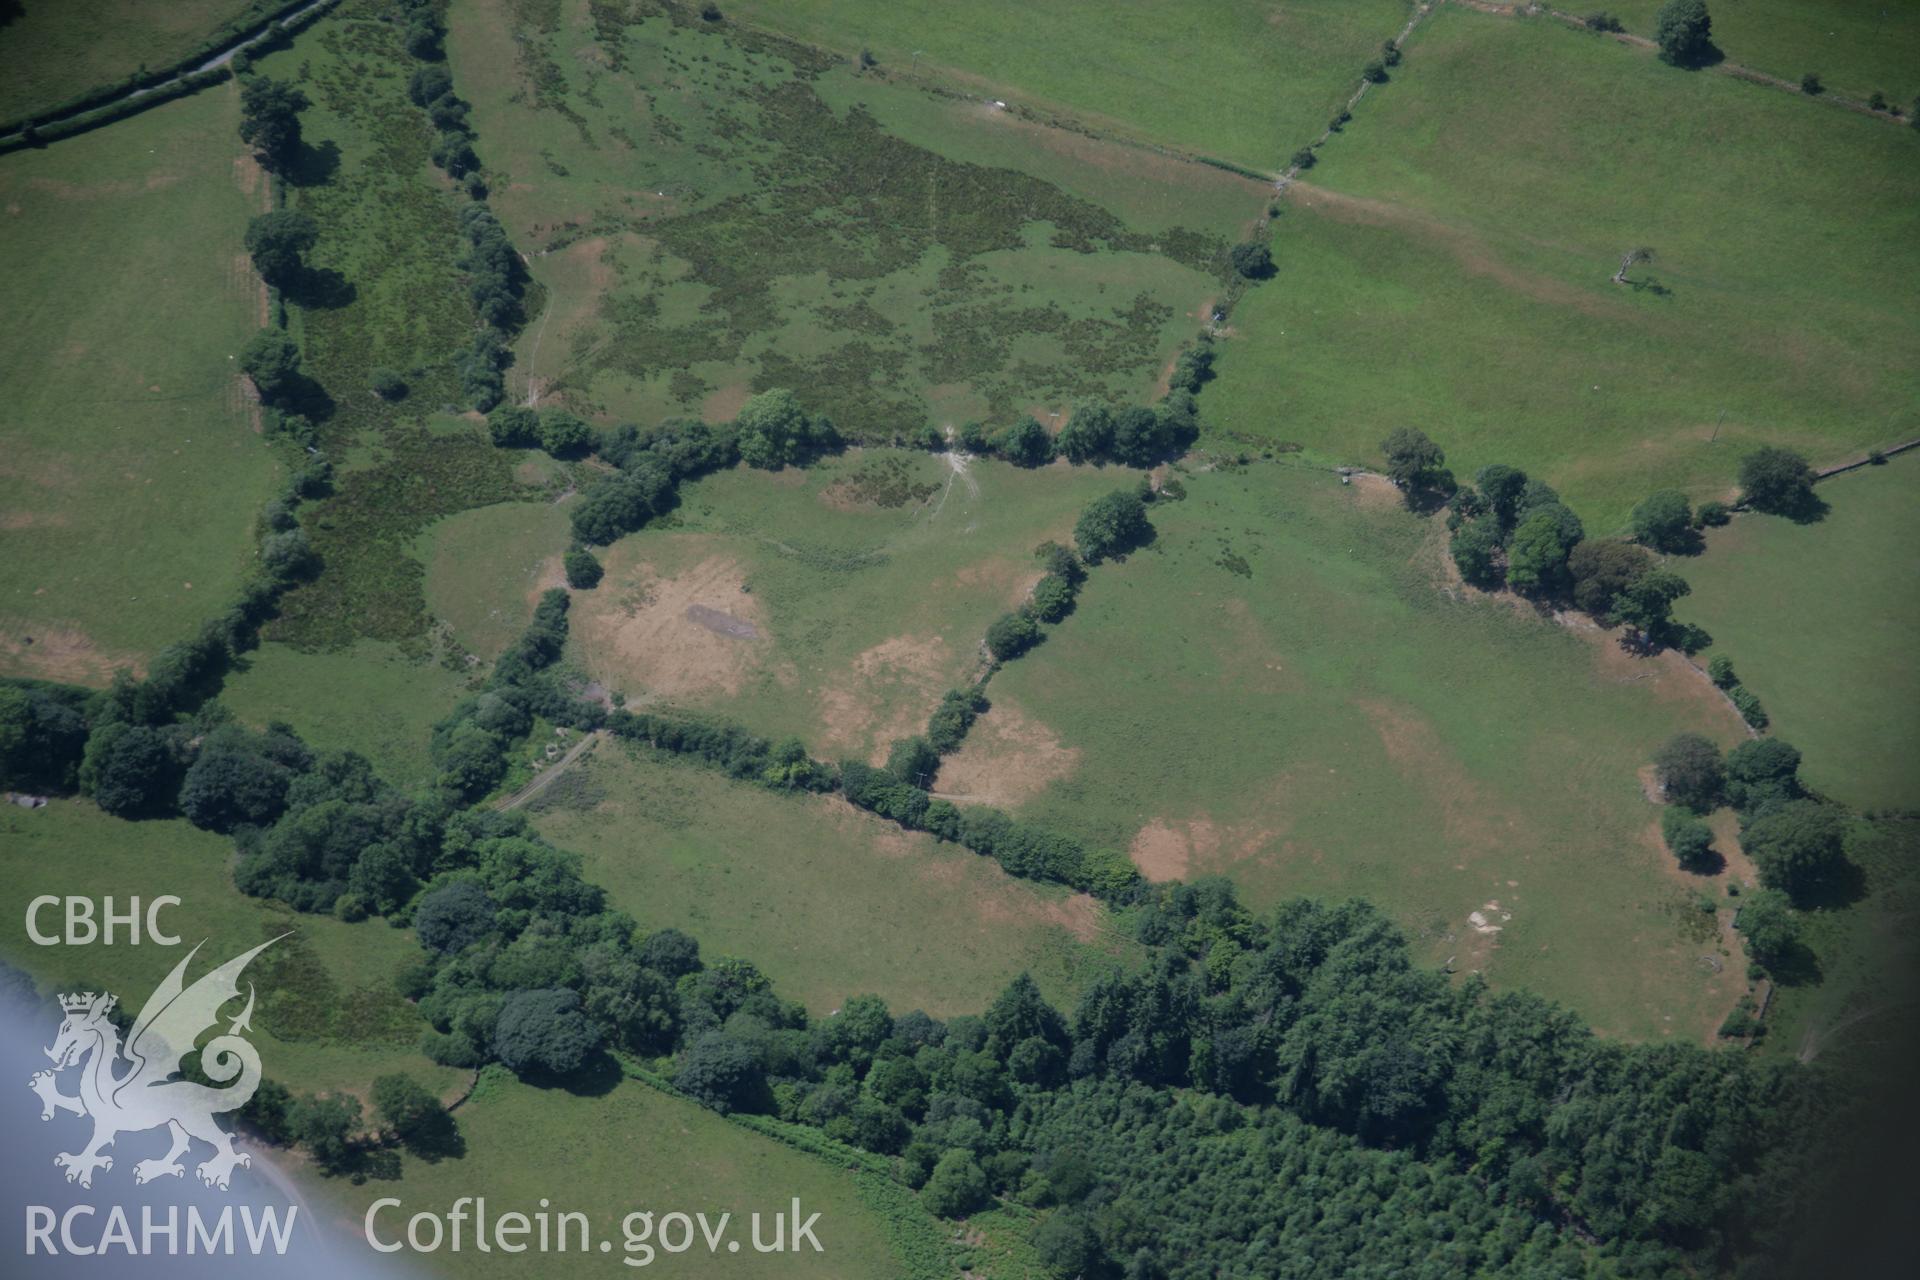 RCAHMW colour oblique aerial photograph showing cropmarks near Llanfor Roman Military Complex. Taken on 25 July 2006 by Toby Driver.